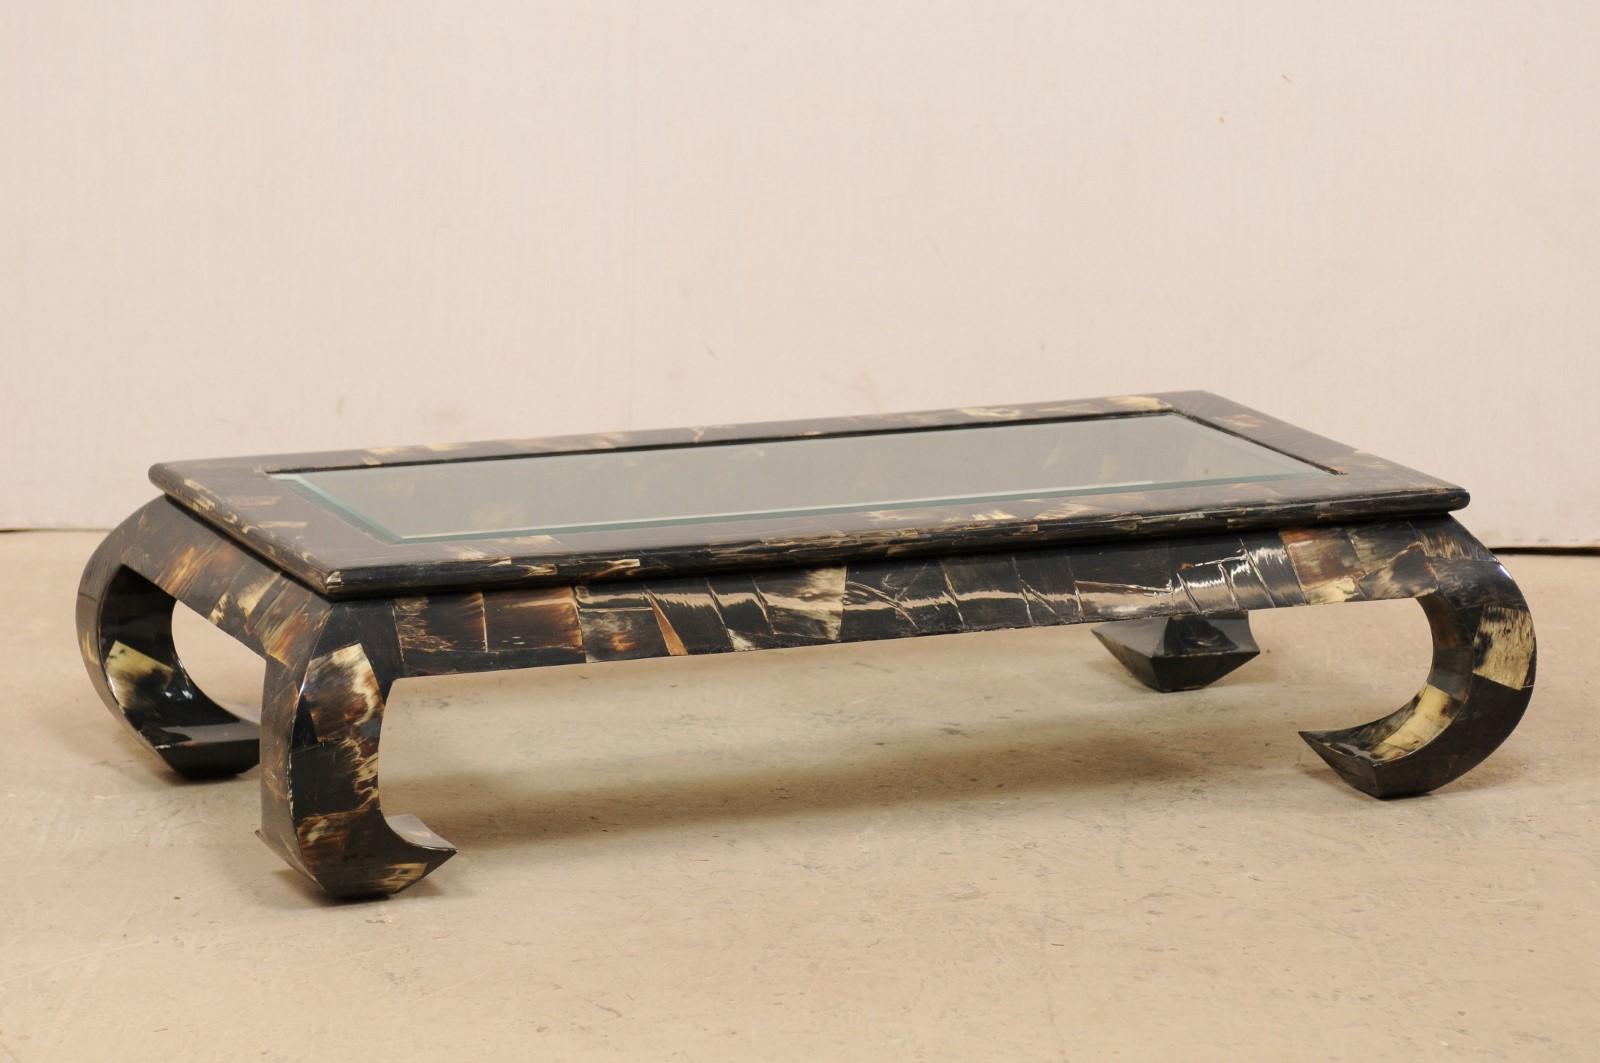 A vintage coffee table with water buffalo veneer and mirrored top. This rectangular-shaped coffee table, created in modern, sleek design lines, features a frame of water buffalo Horn veneer, creating much visual interest to this piece. While the top